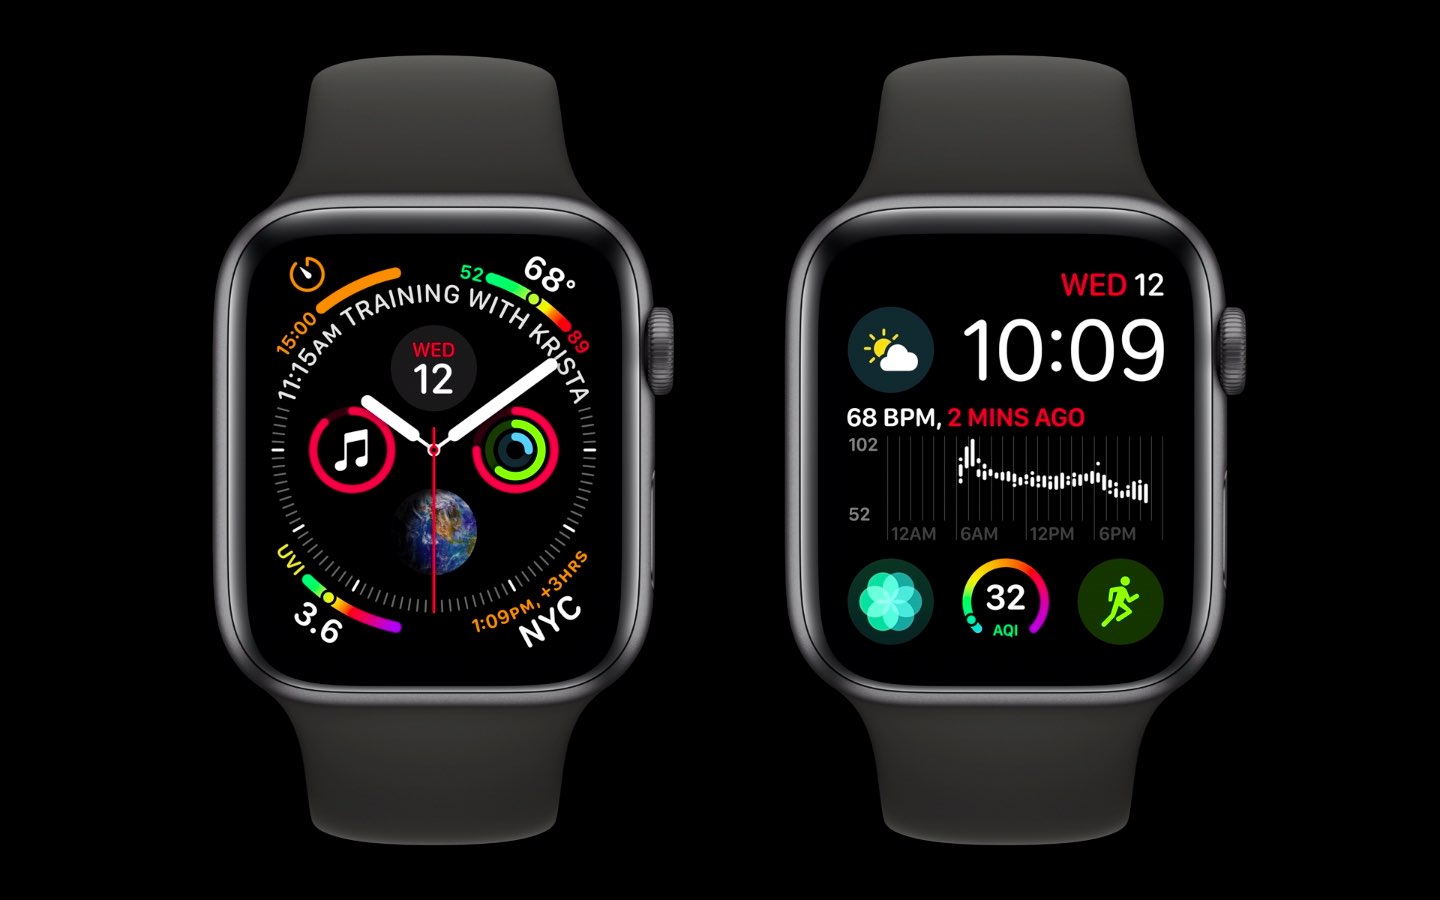 Apple Watch complications on Series 4 are much richer and denser